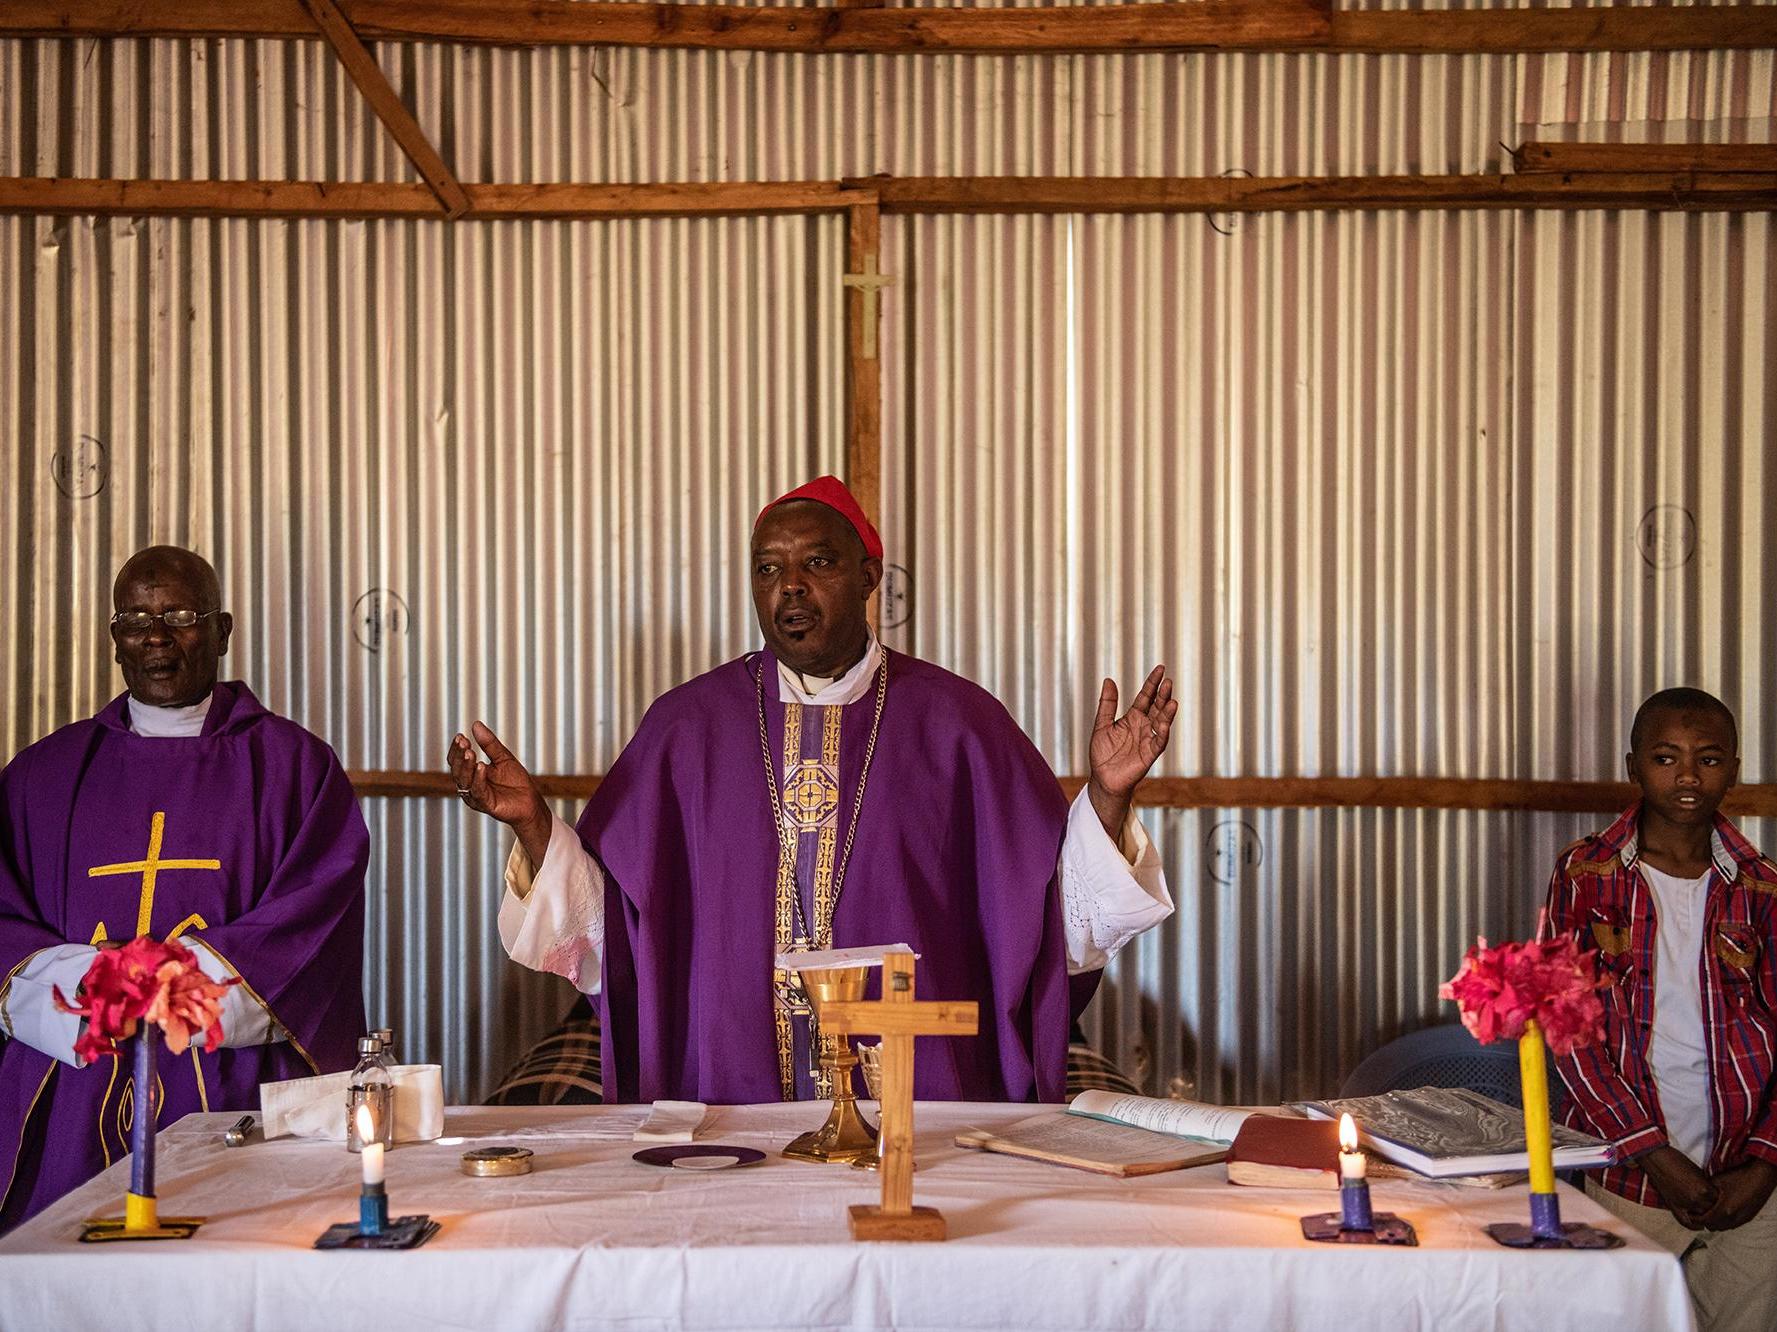 Priests in Kenya are doing away with the Catholic vow of celibacy and the "culture of secrecy" it creates